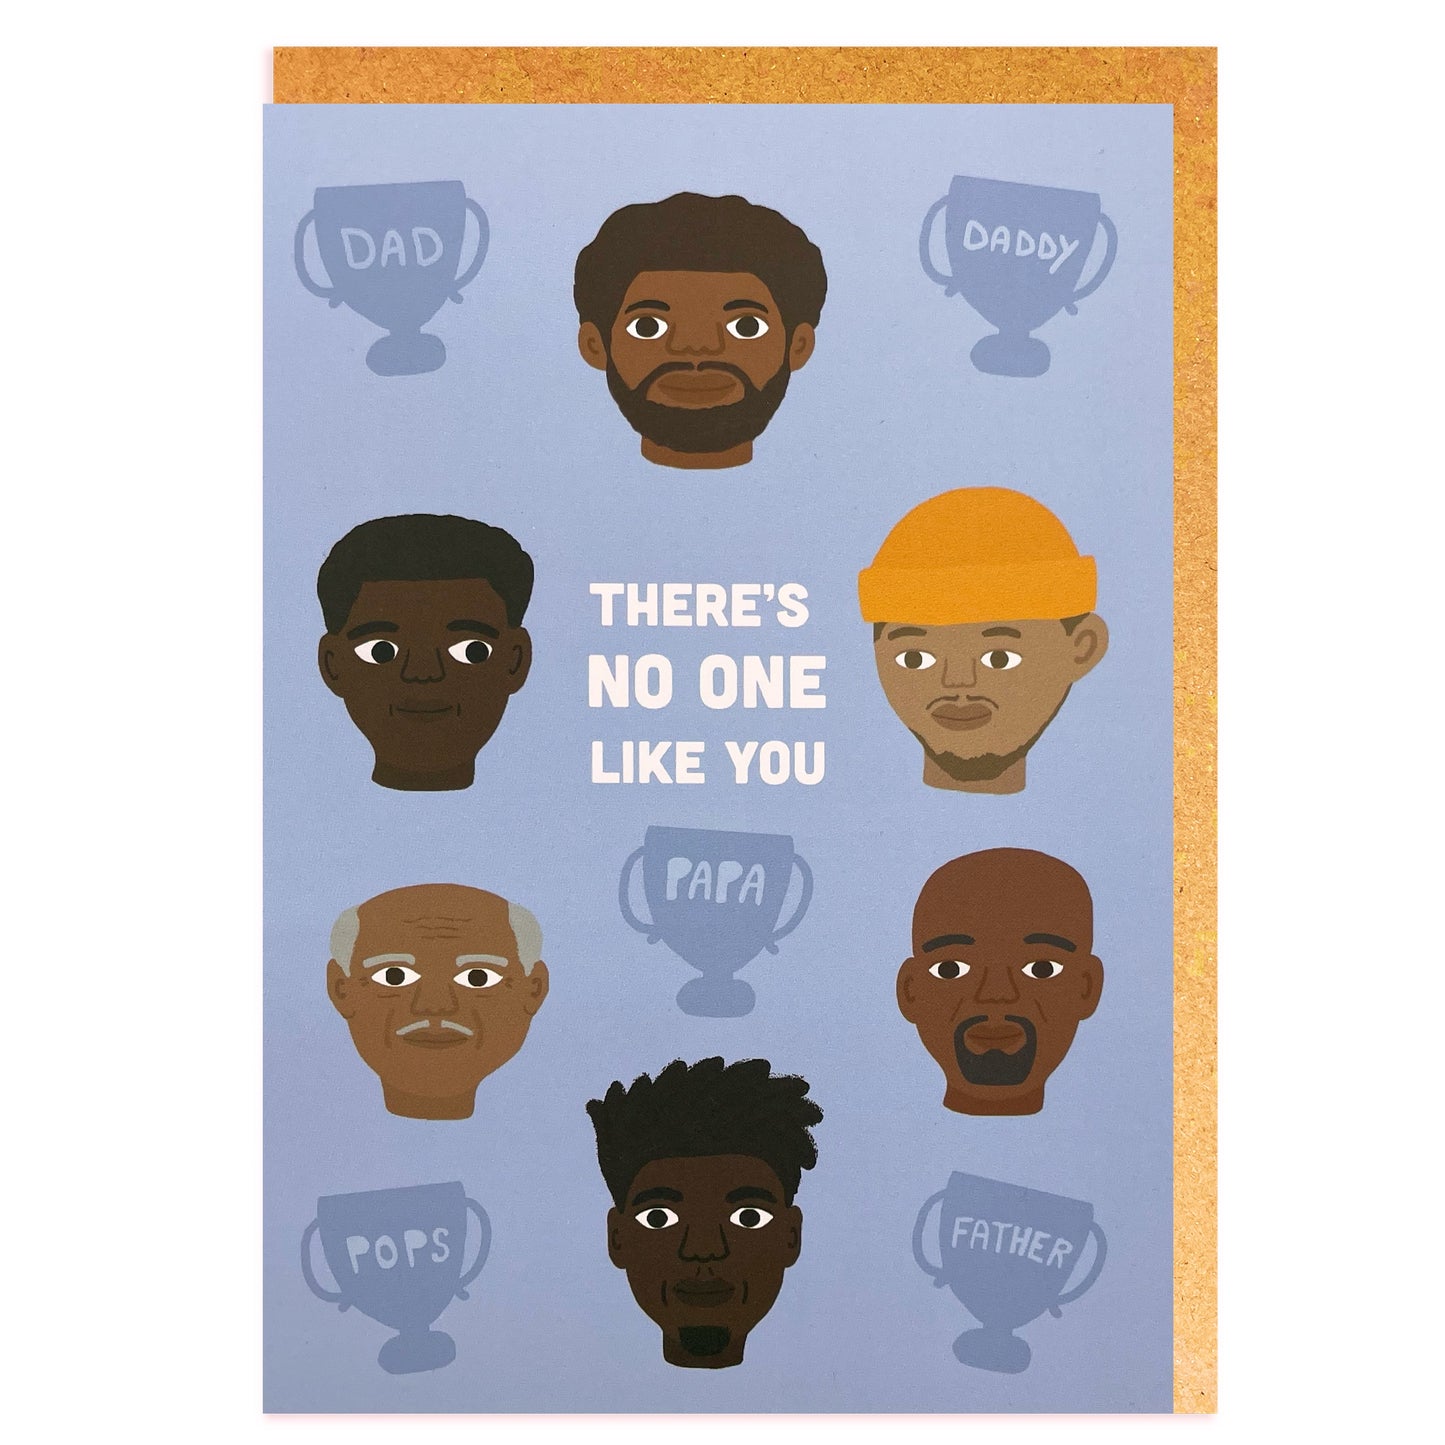 There's no one like you (dad) - Black & Mixed Greeting Cards